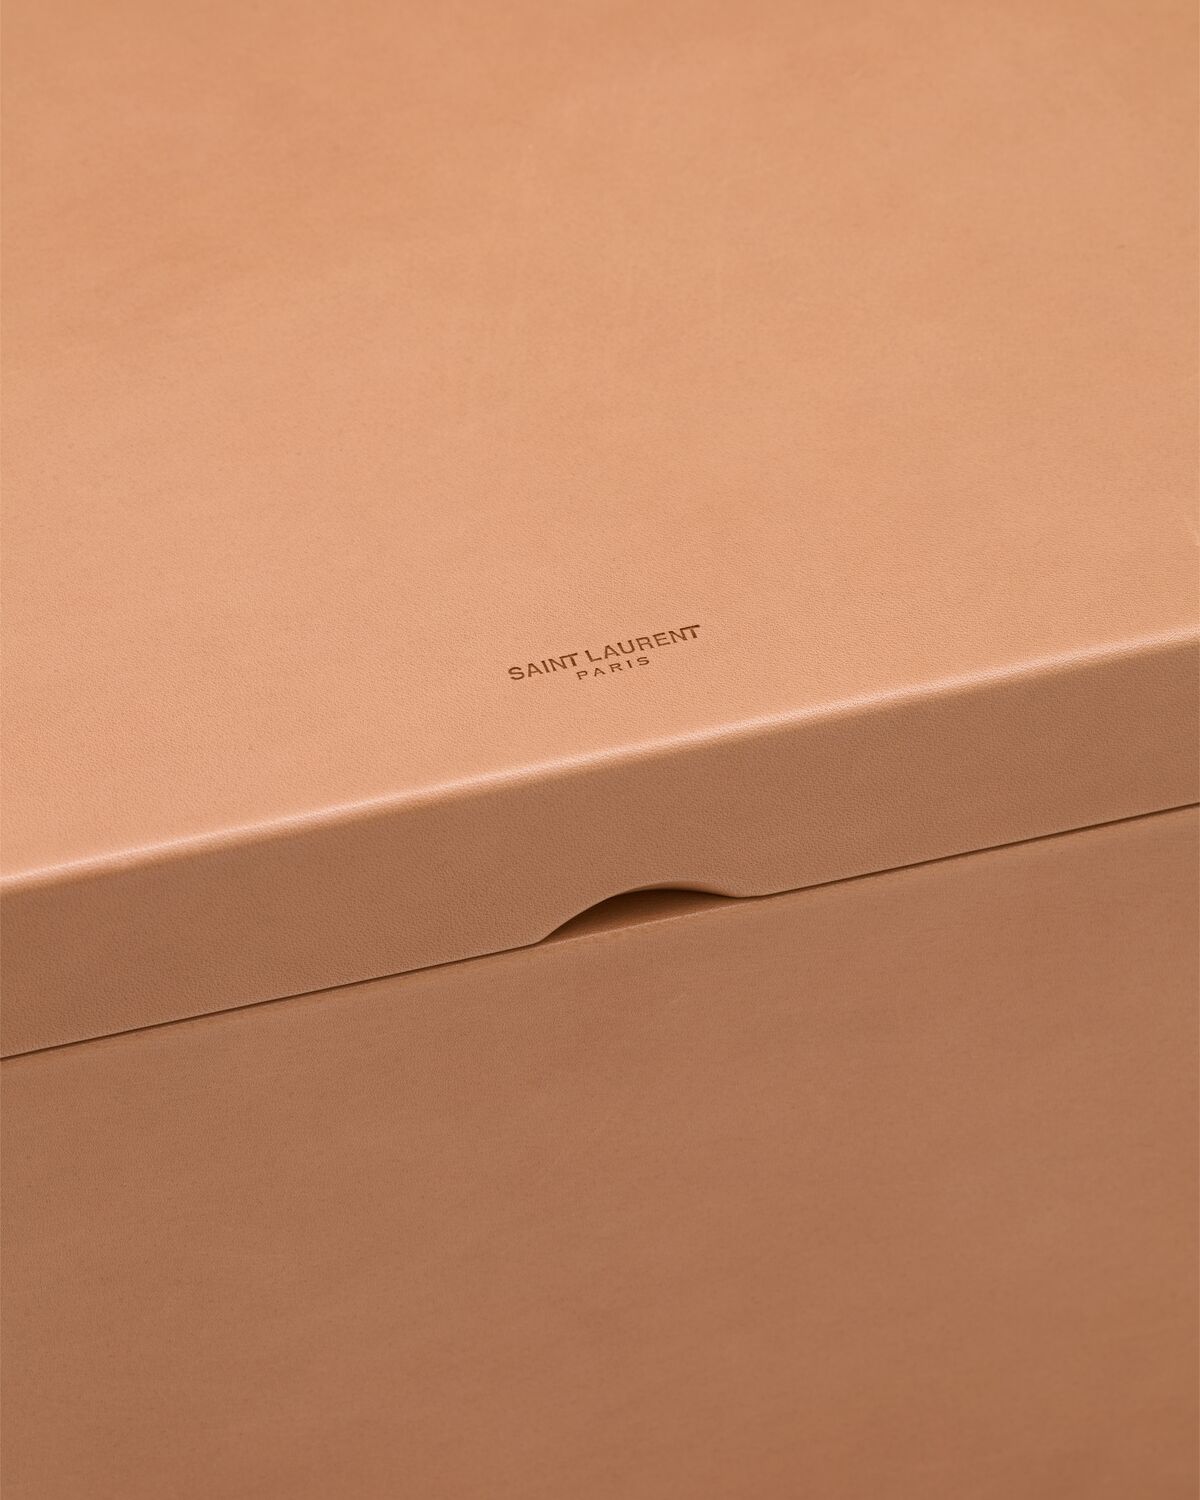 SMALL BOX IN VEGETABLE-TANNED LEATHER